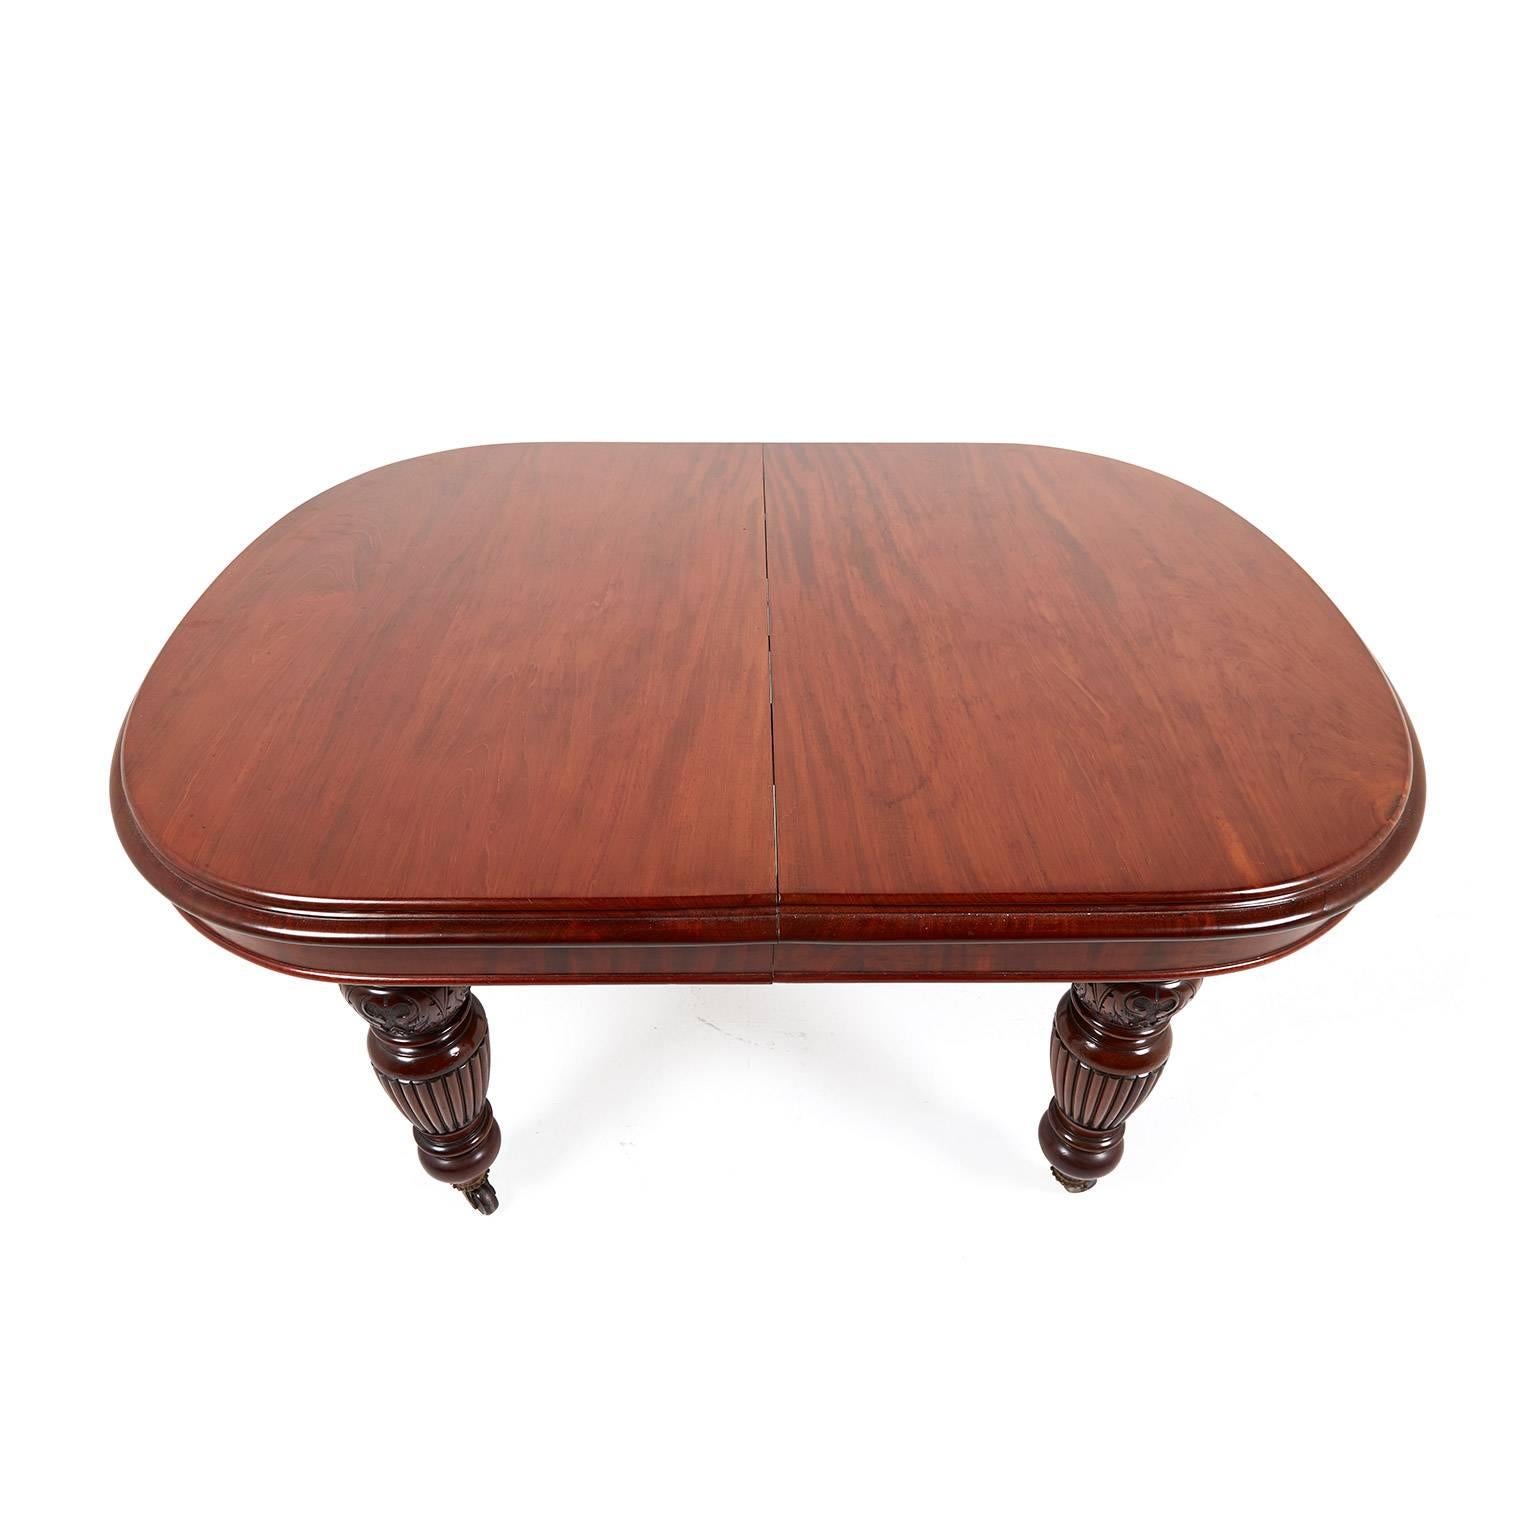 English mahogany Victorian dining table with two leaves, circa 1870. Hand-crank operation for inserting leaves. Really outstanding condition on this piece. With solid carved legs, this table is suitable for everyday use. Original casters. 

Each